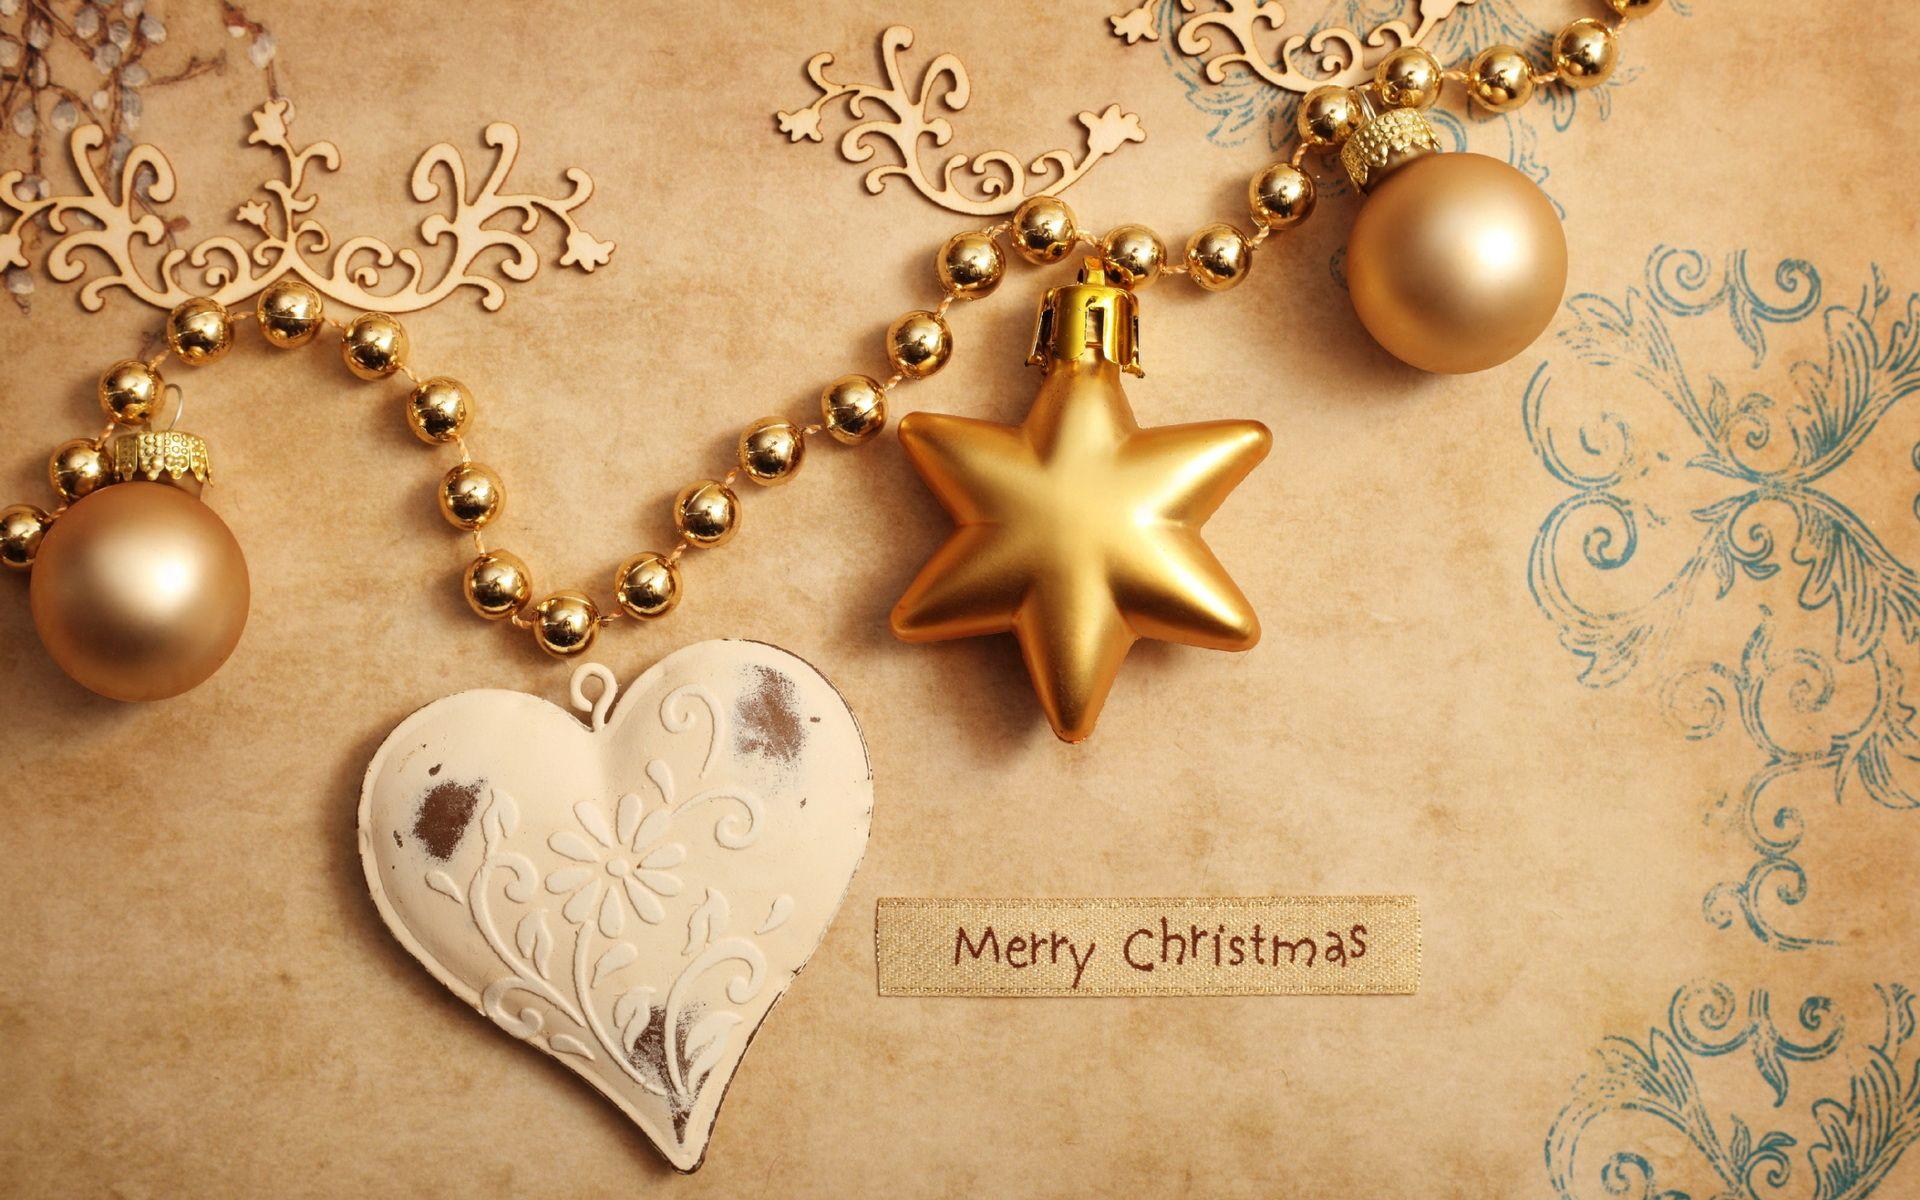 Merry Christmas Wallpaper, Picture, Image